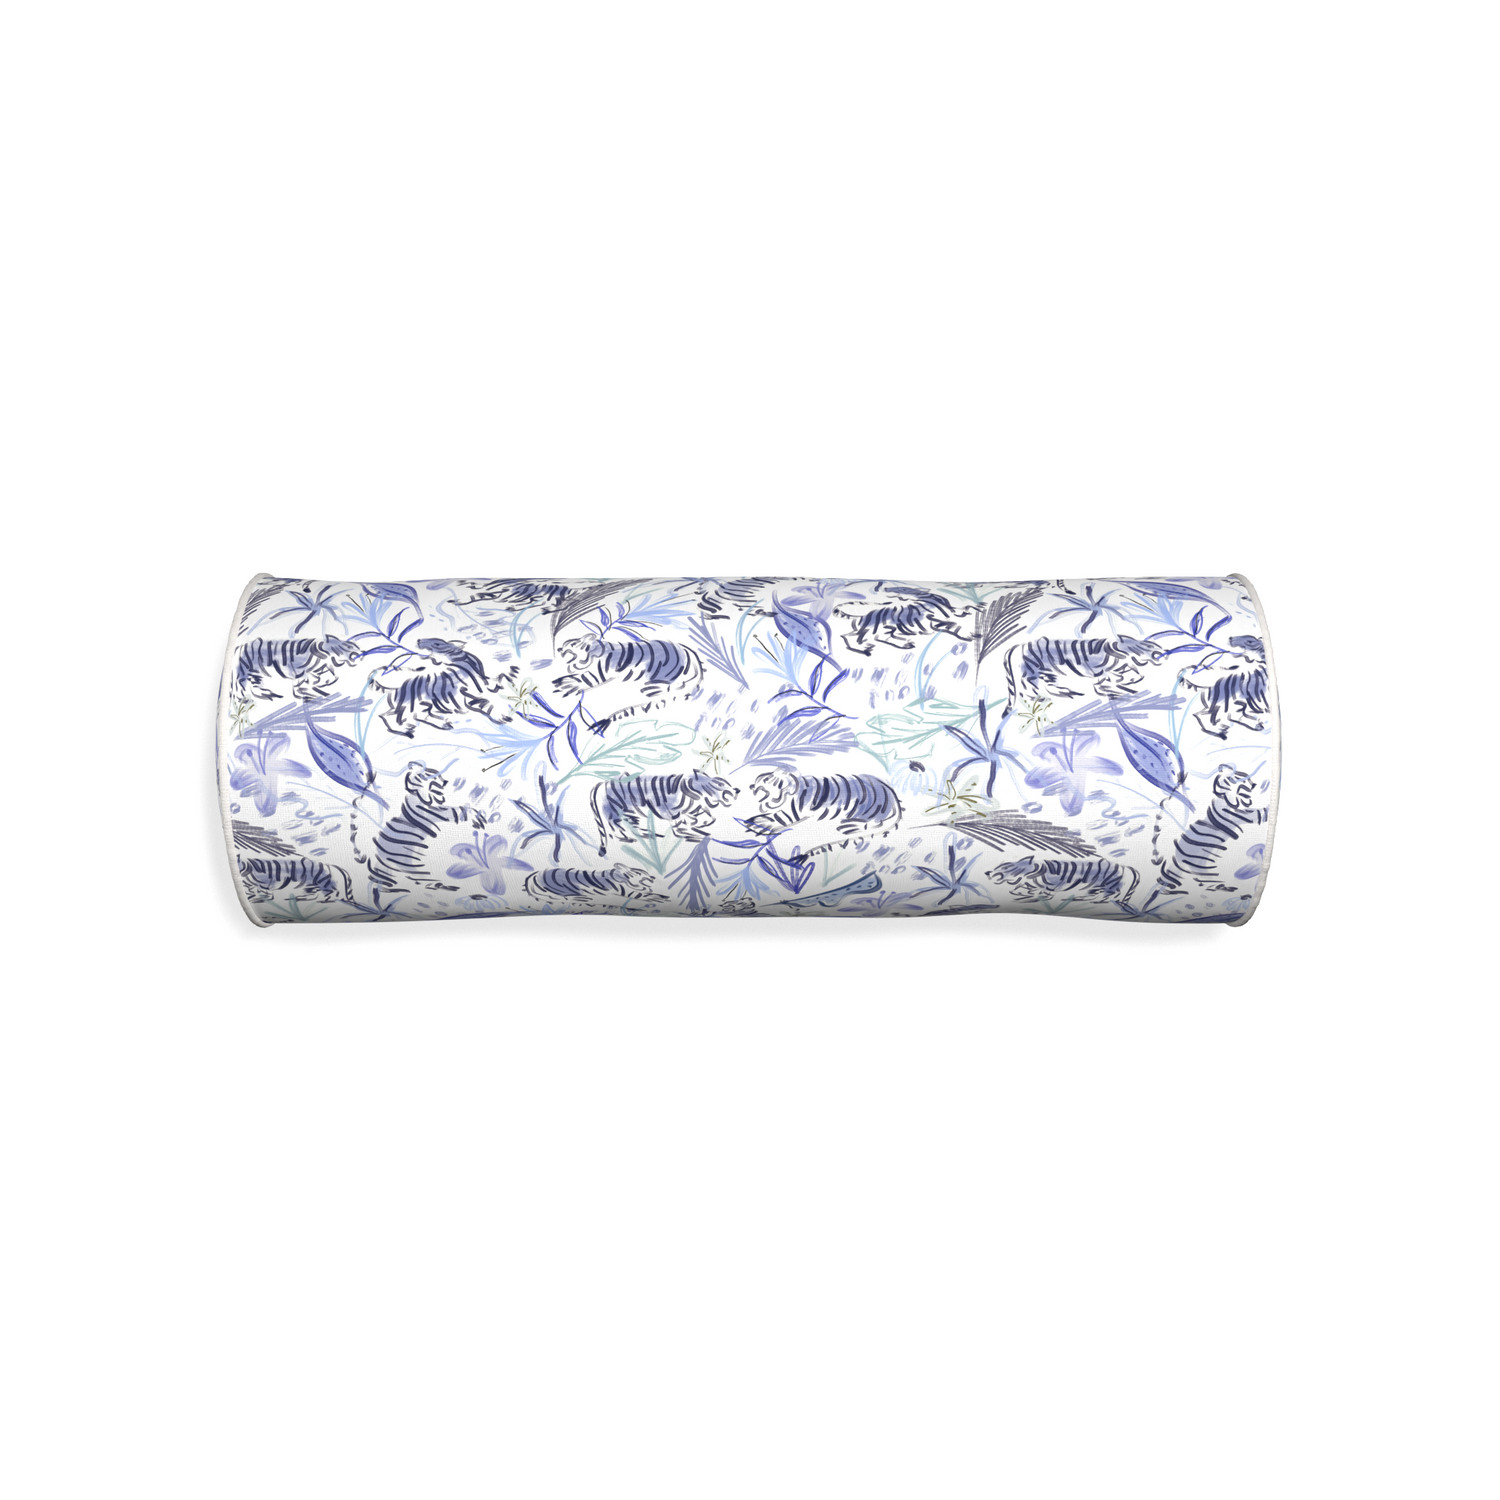 Bolster frida blue custom blue with intricate tiger designpillow with snow piping on white background